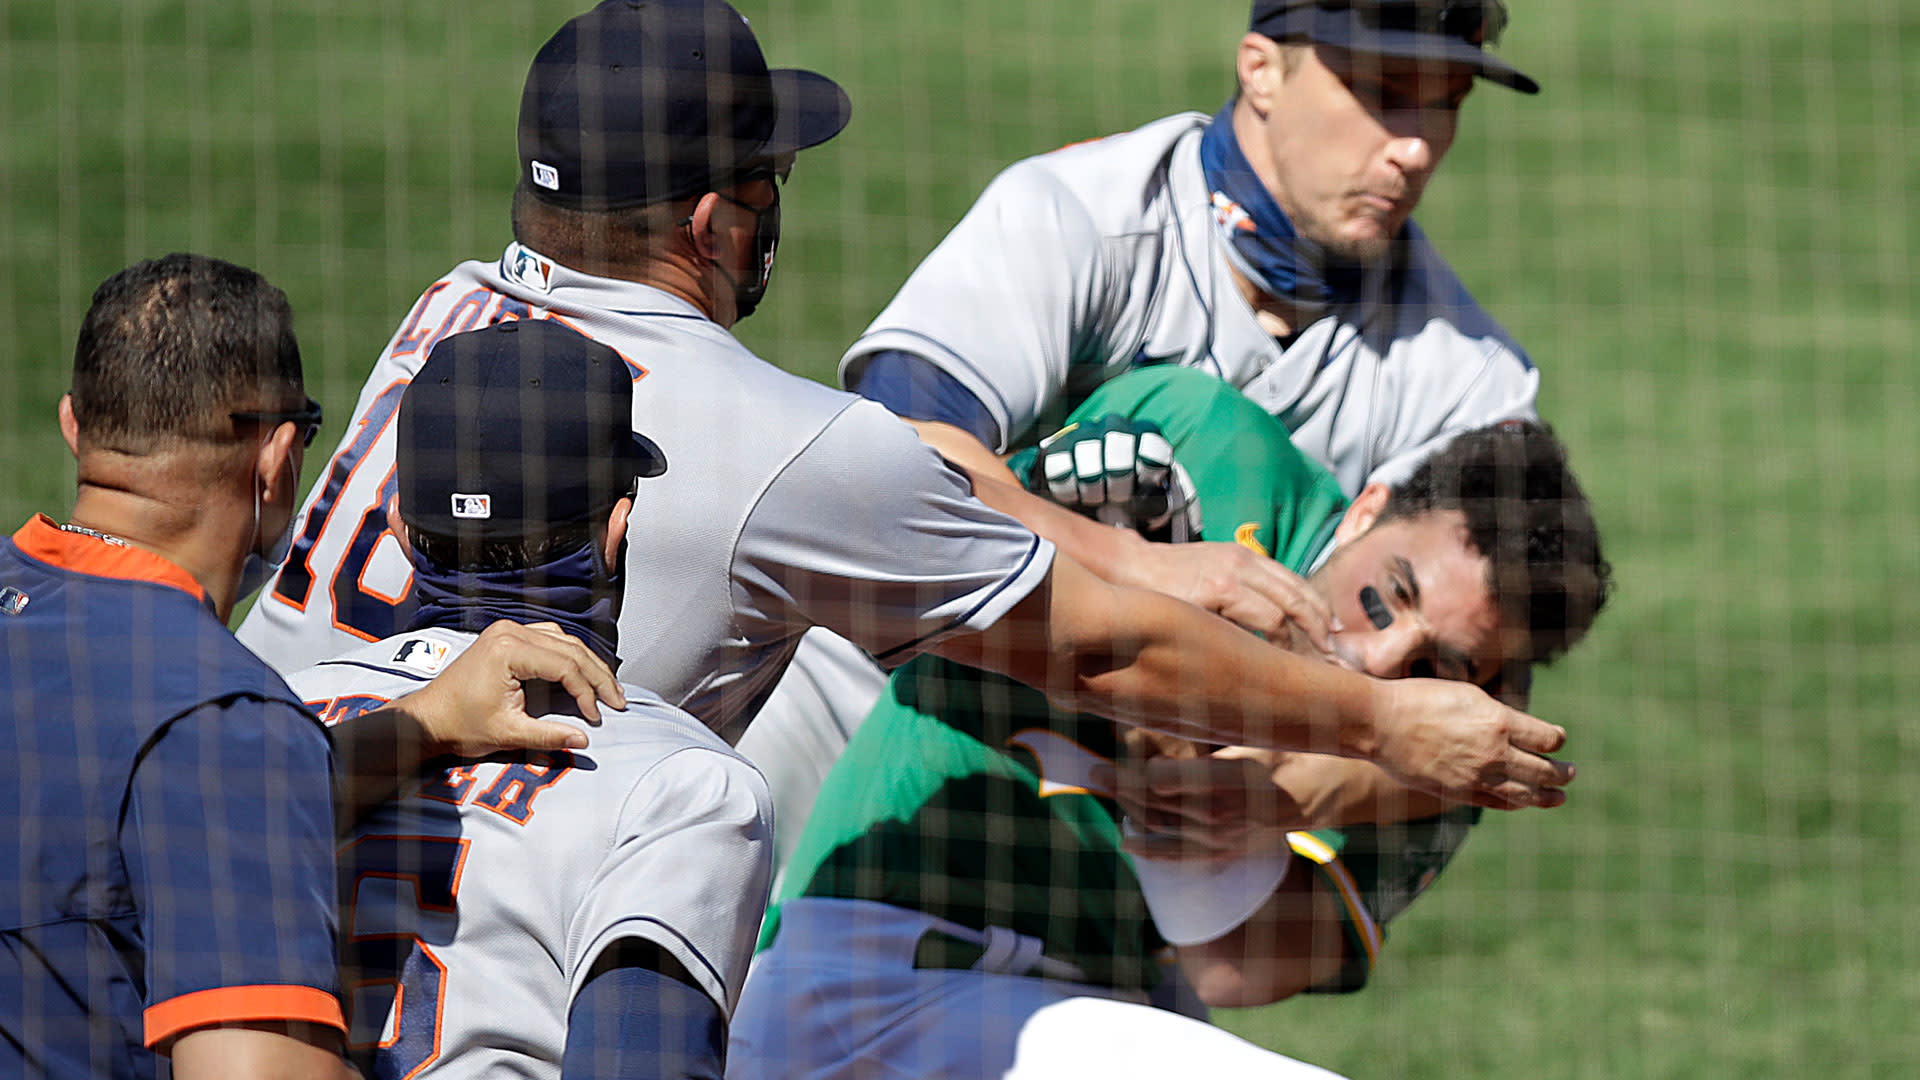 Bench-clearing confrontation over simmering Astros-Dodgers feud leads to  suspensions